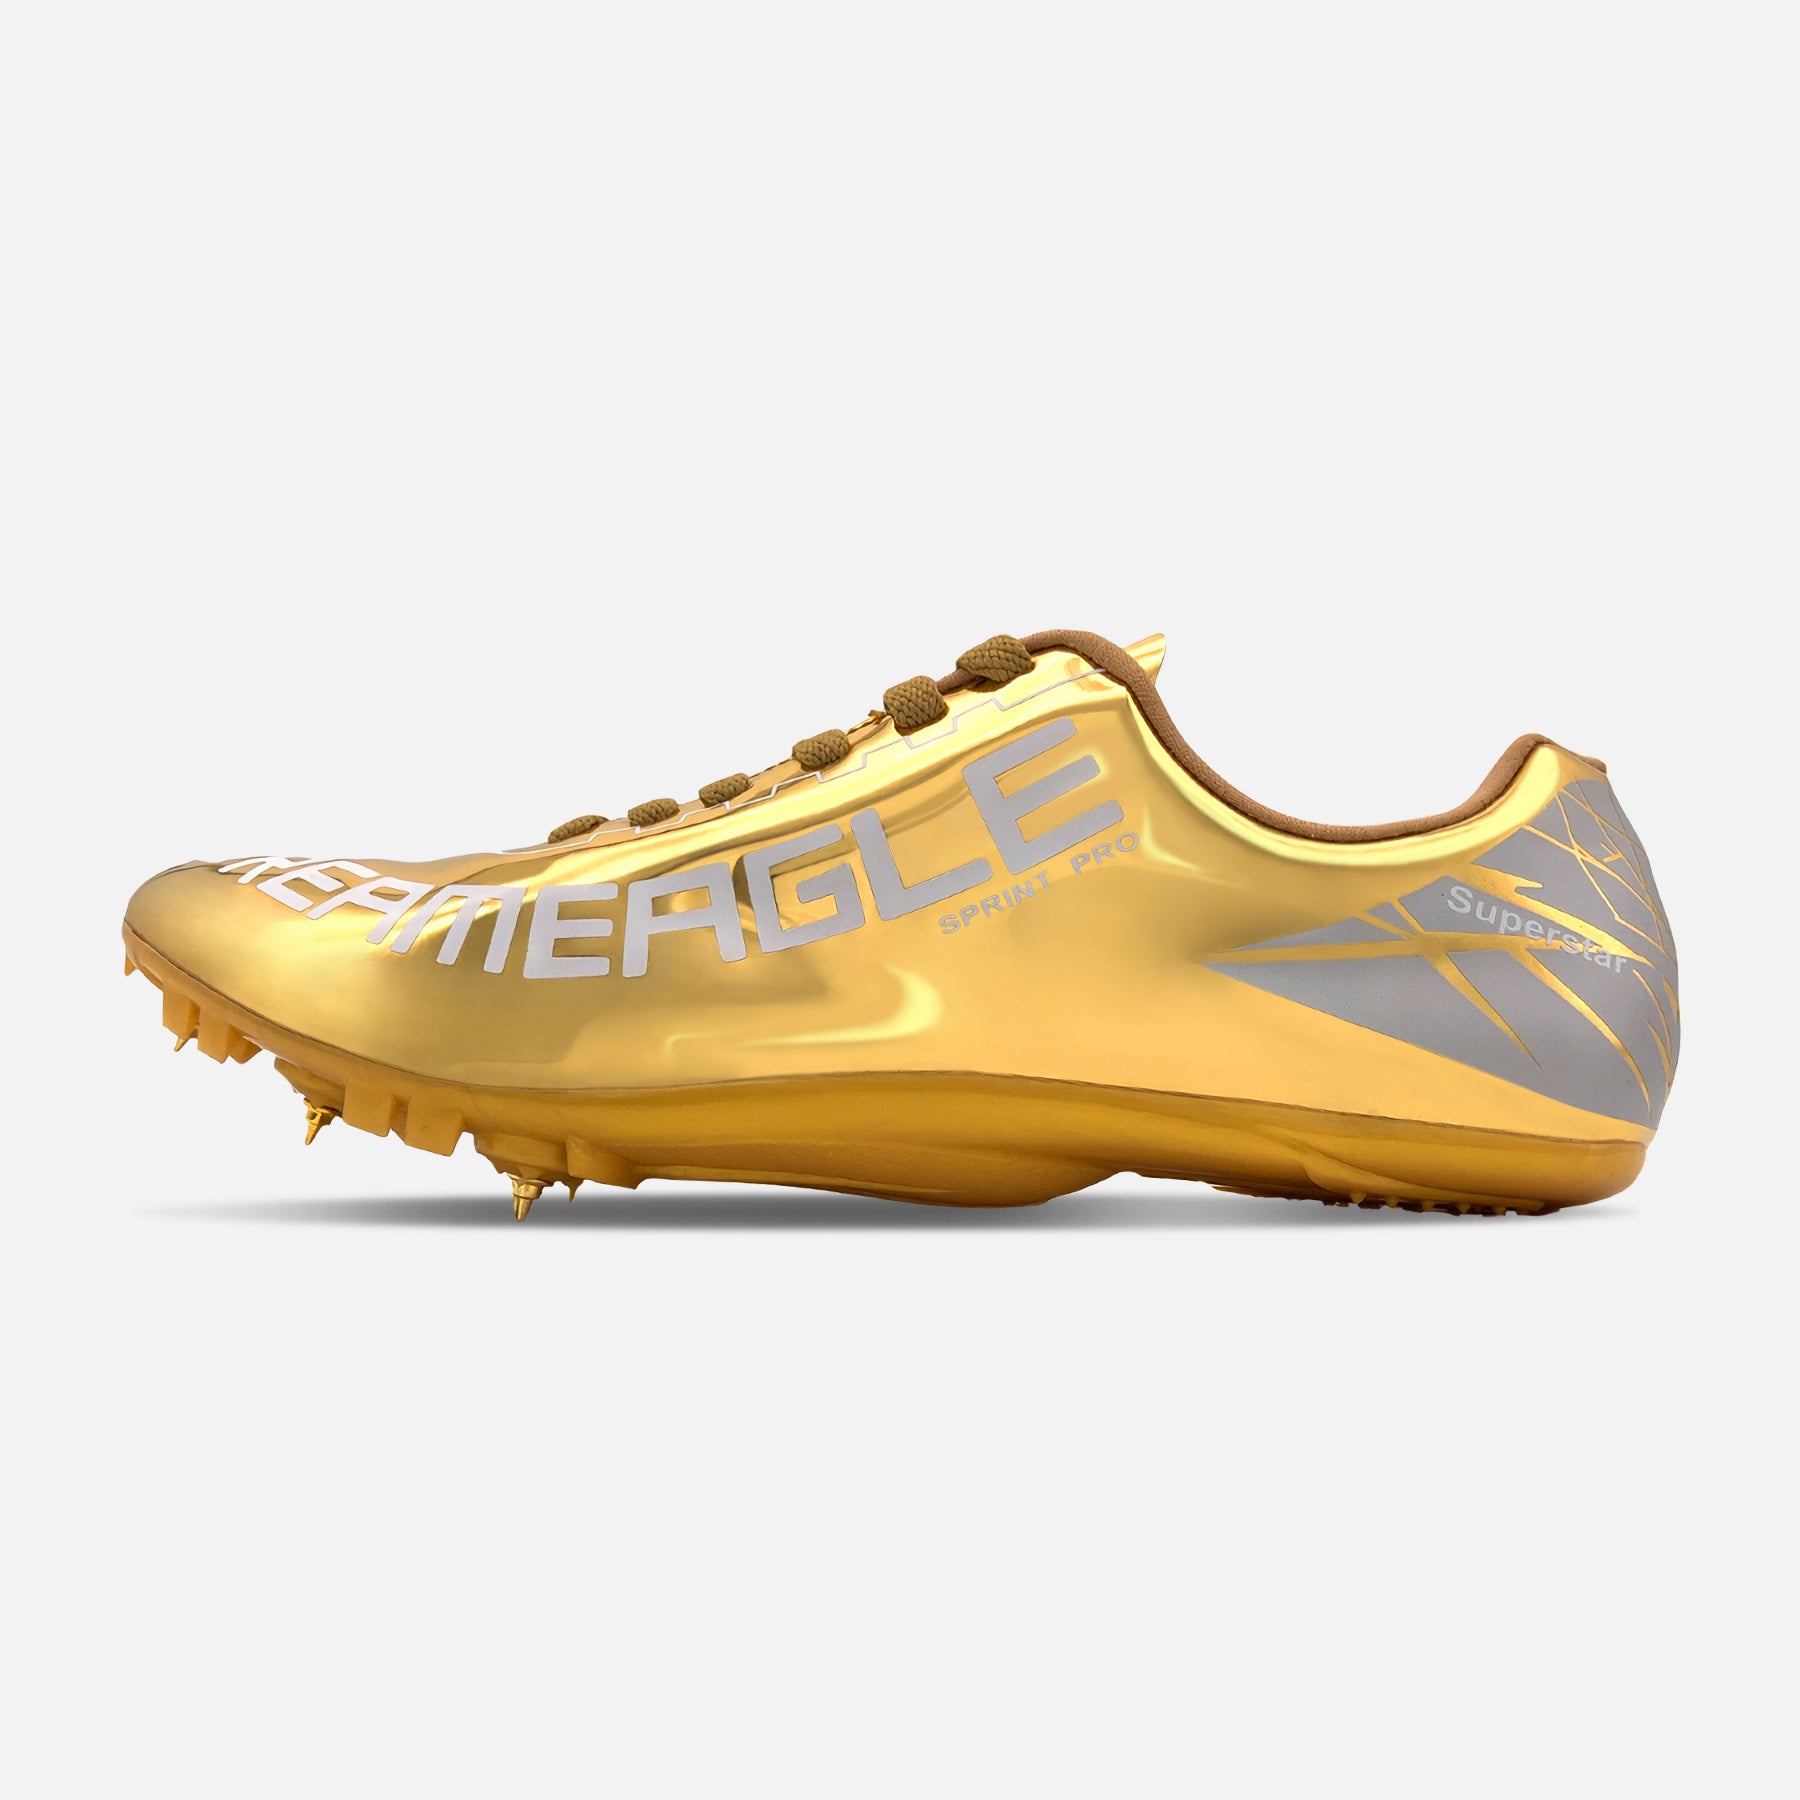 Eagle Gold Sprint Track Spikes Shoes